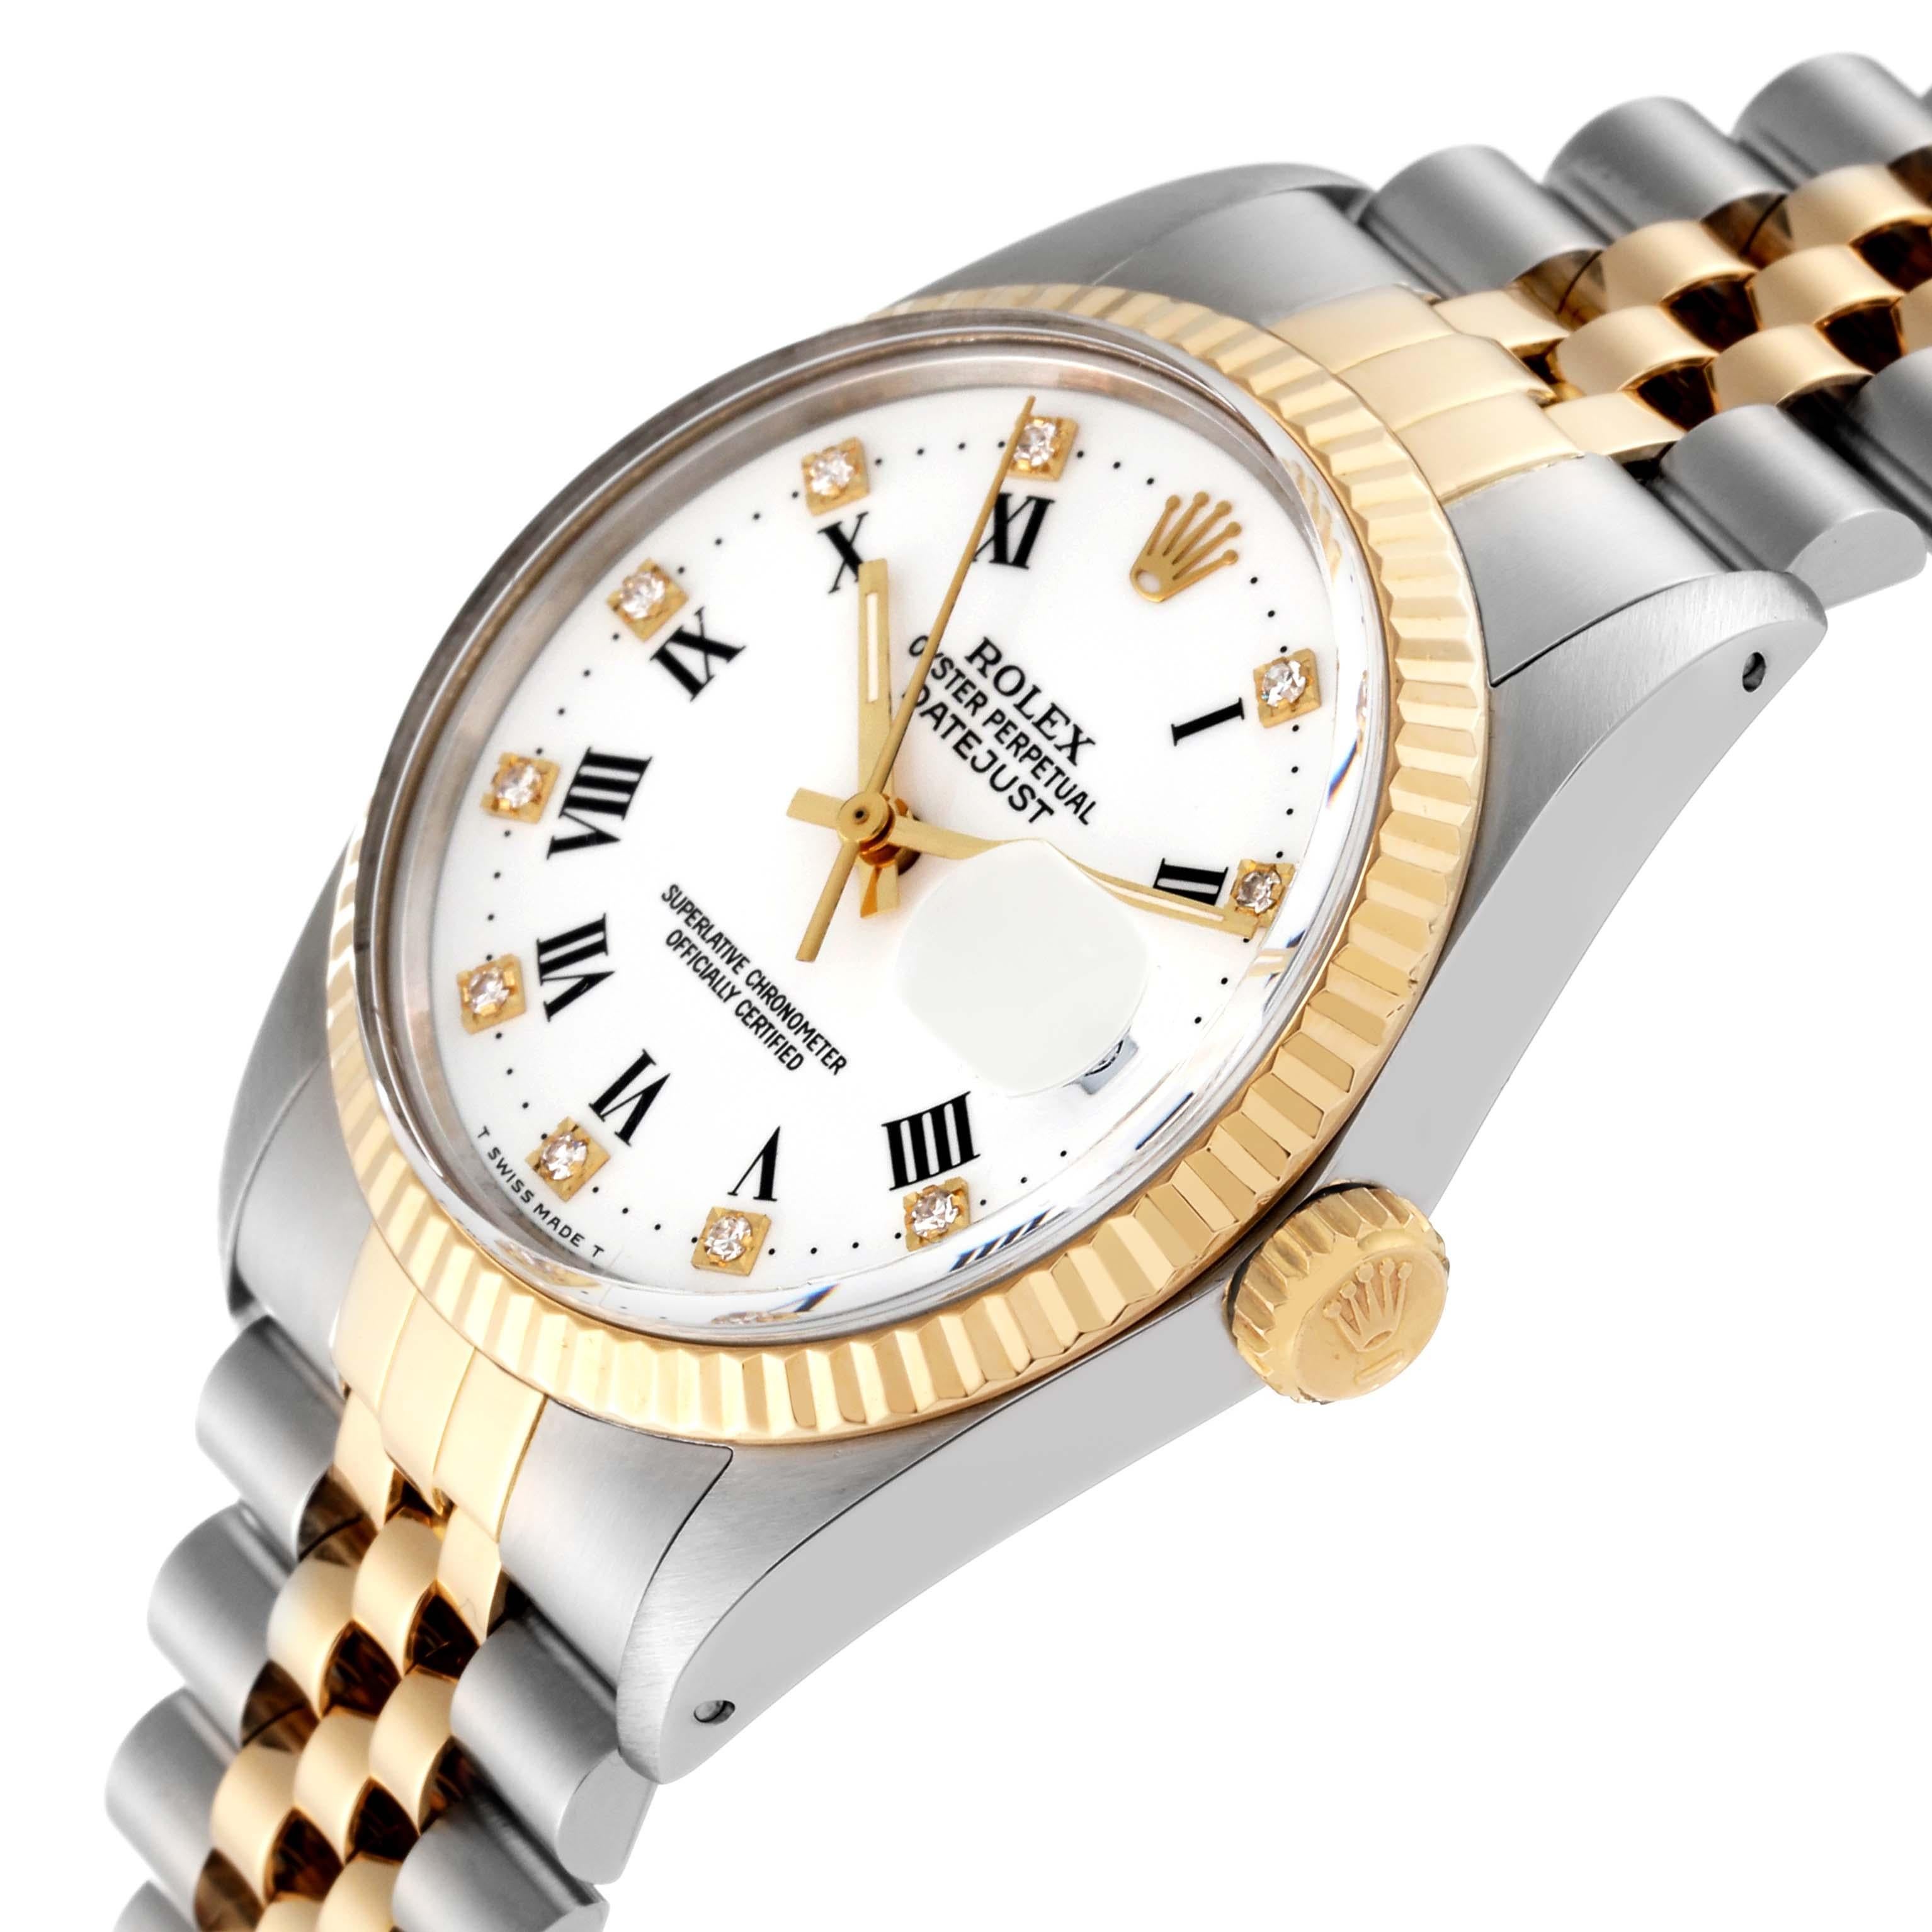 Rolex Datejust Steel Yellow Gold White Diamond Dial Vintage Mens Watch 16013 For Sale 1